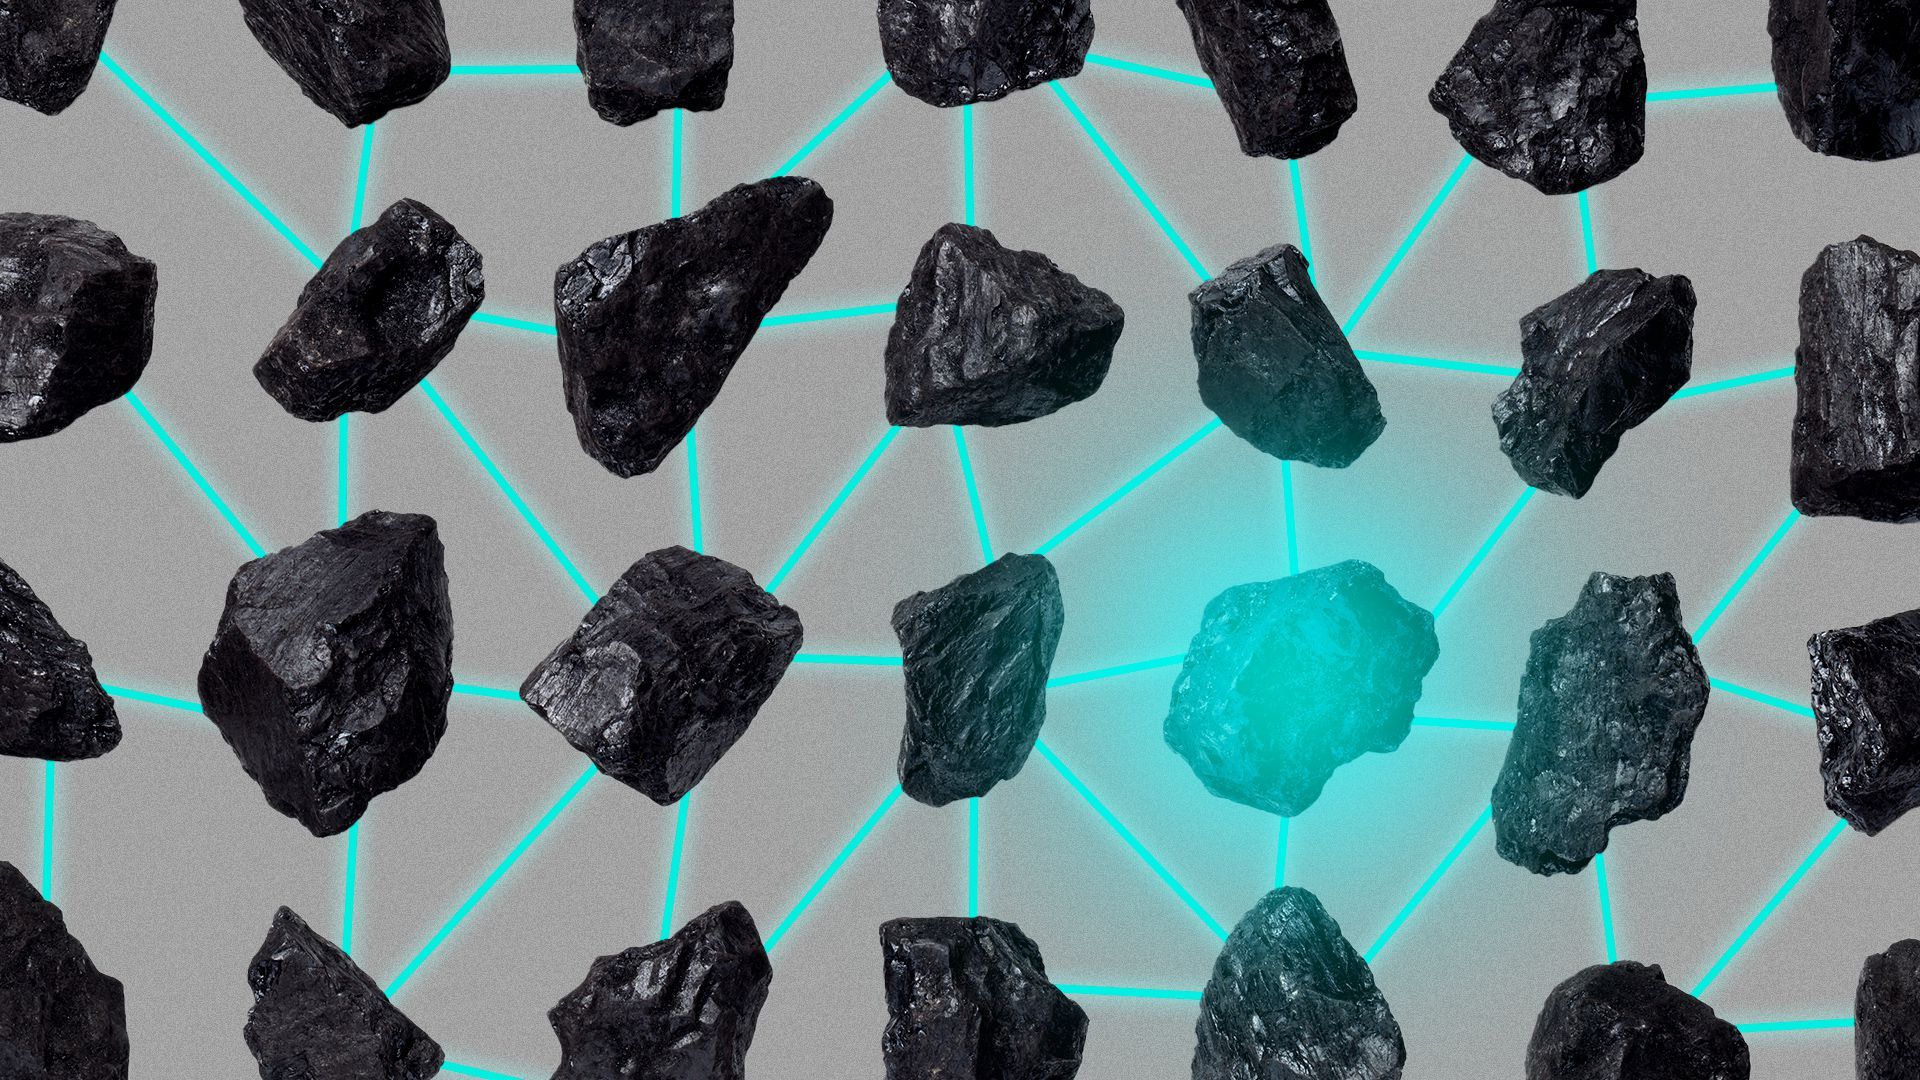 Illustration of a pattern made up of pieces of coal connected by glowing blockchain lines, with one piece of coal glowing.